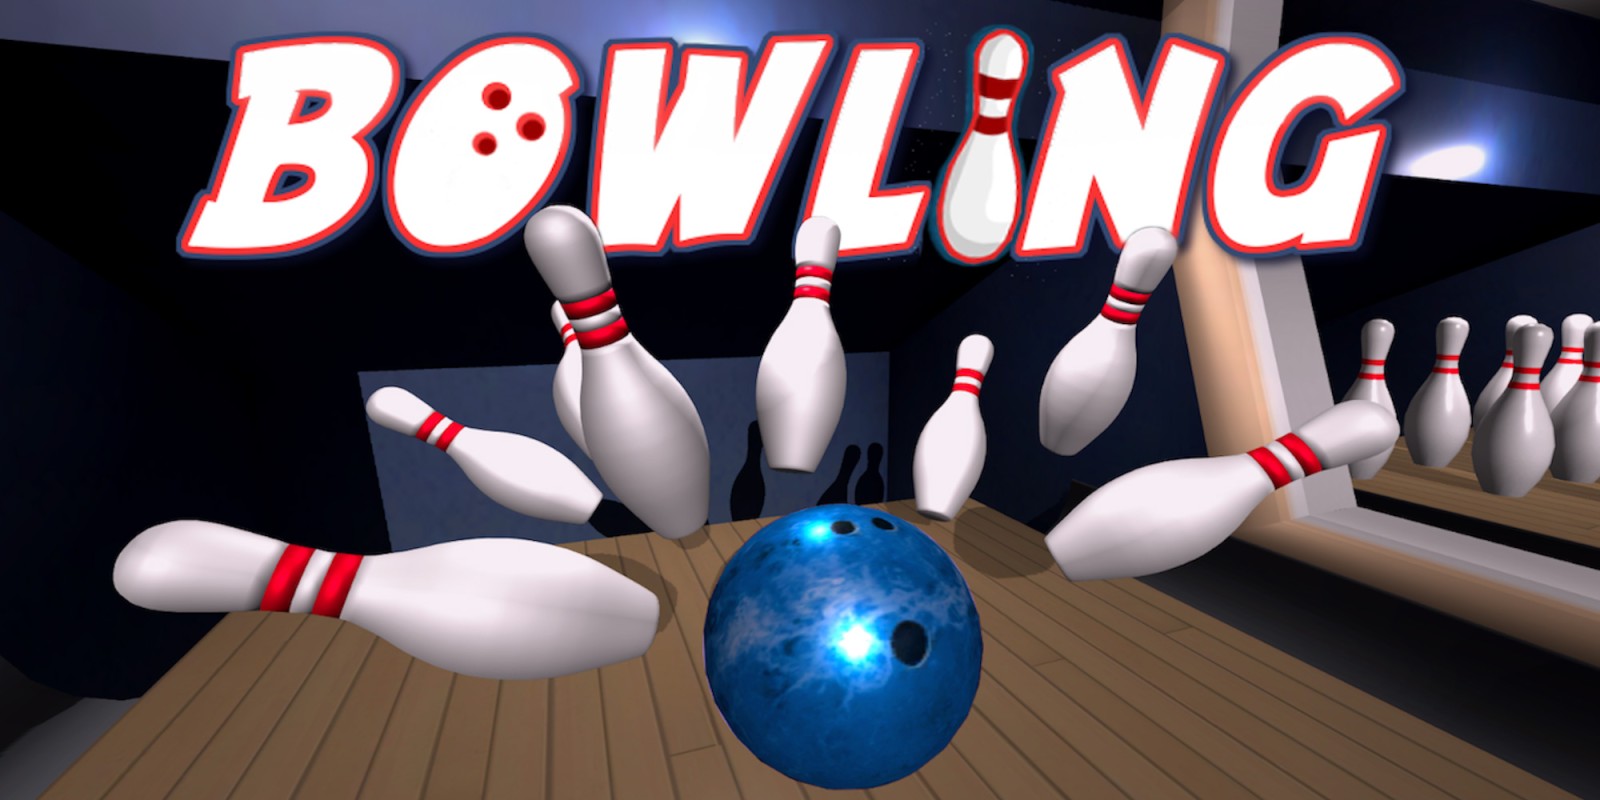 What makes bowling so well-liked?